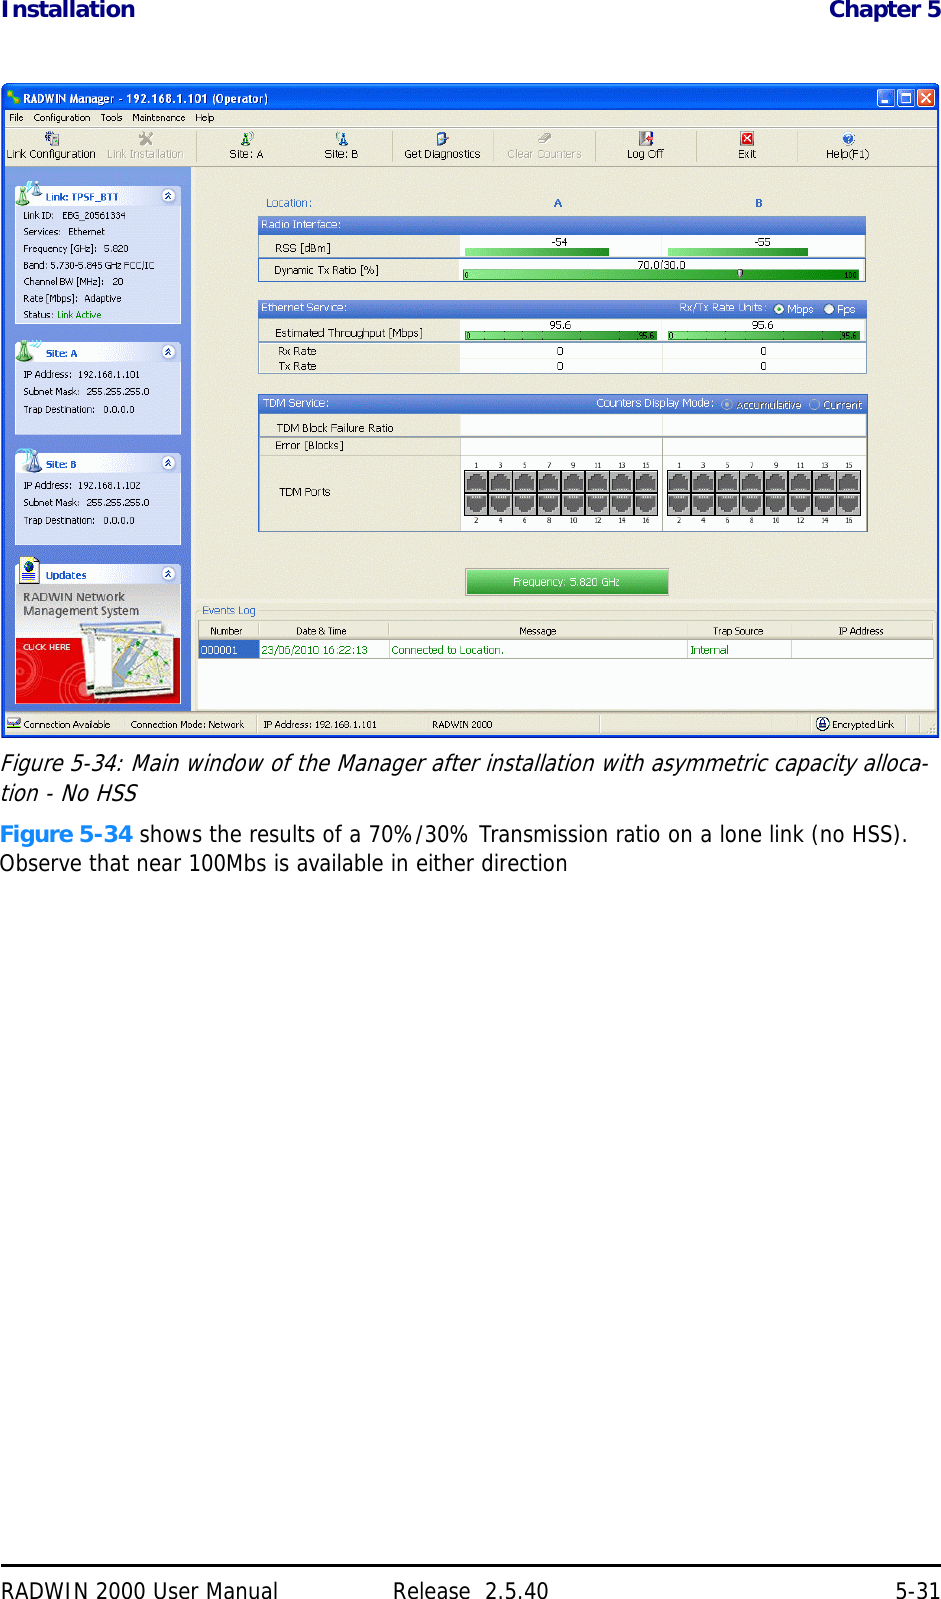 Installation Chapter 5RADWIN 2000 User Manual Release  2.5.40 5-31Figure 5-34: Main window of the Manager after installation with asymmetric capacity alloca-tion - No HSSFigure 5-34 shows the results of a 70%/30% Transmission ratio on a lone link (no HSS). Observe that near 100Mbs is available in either direction